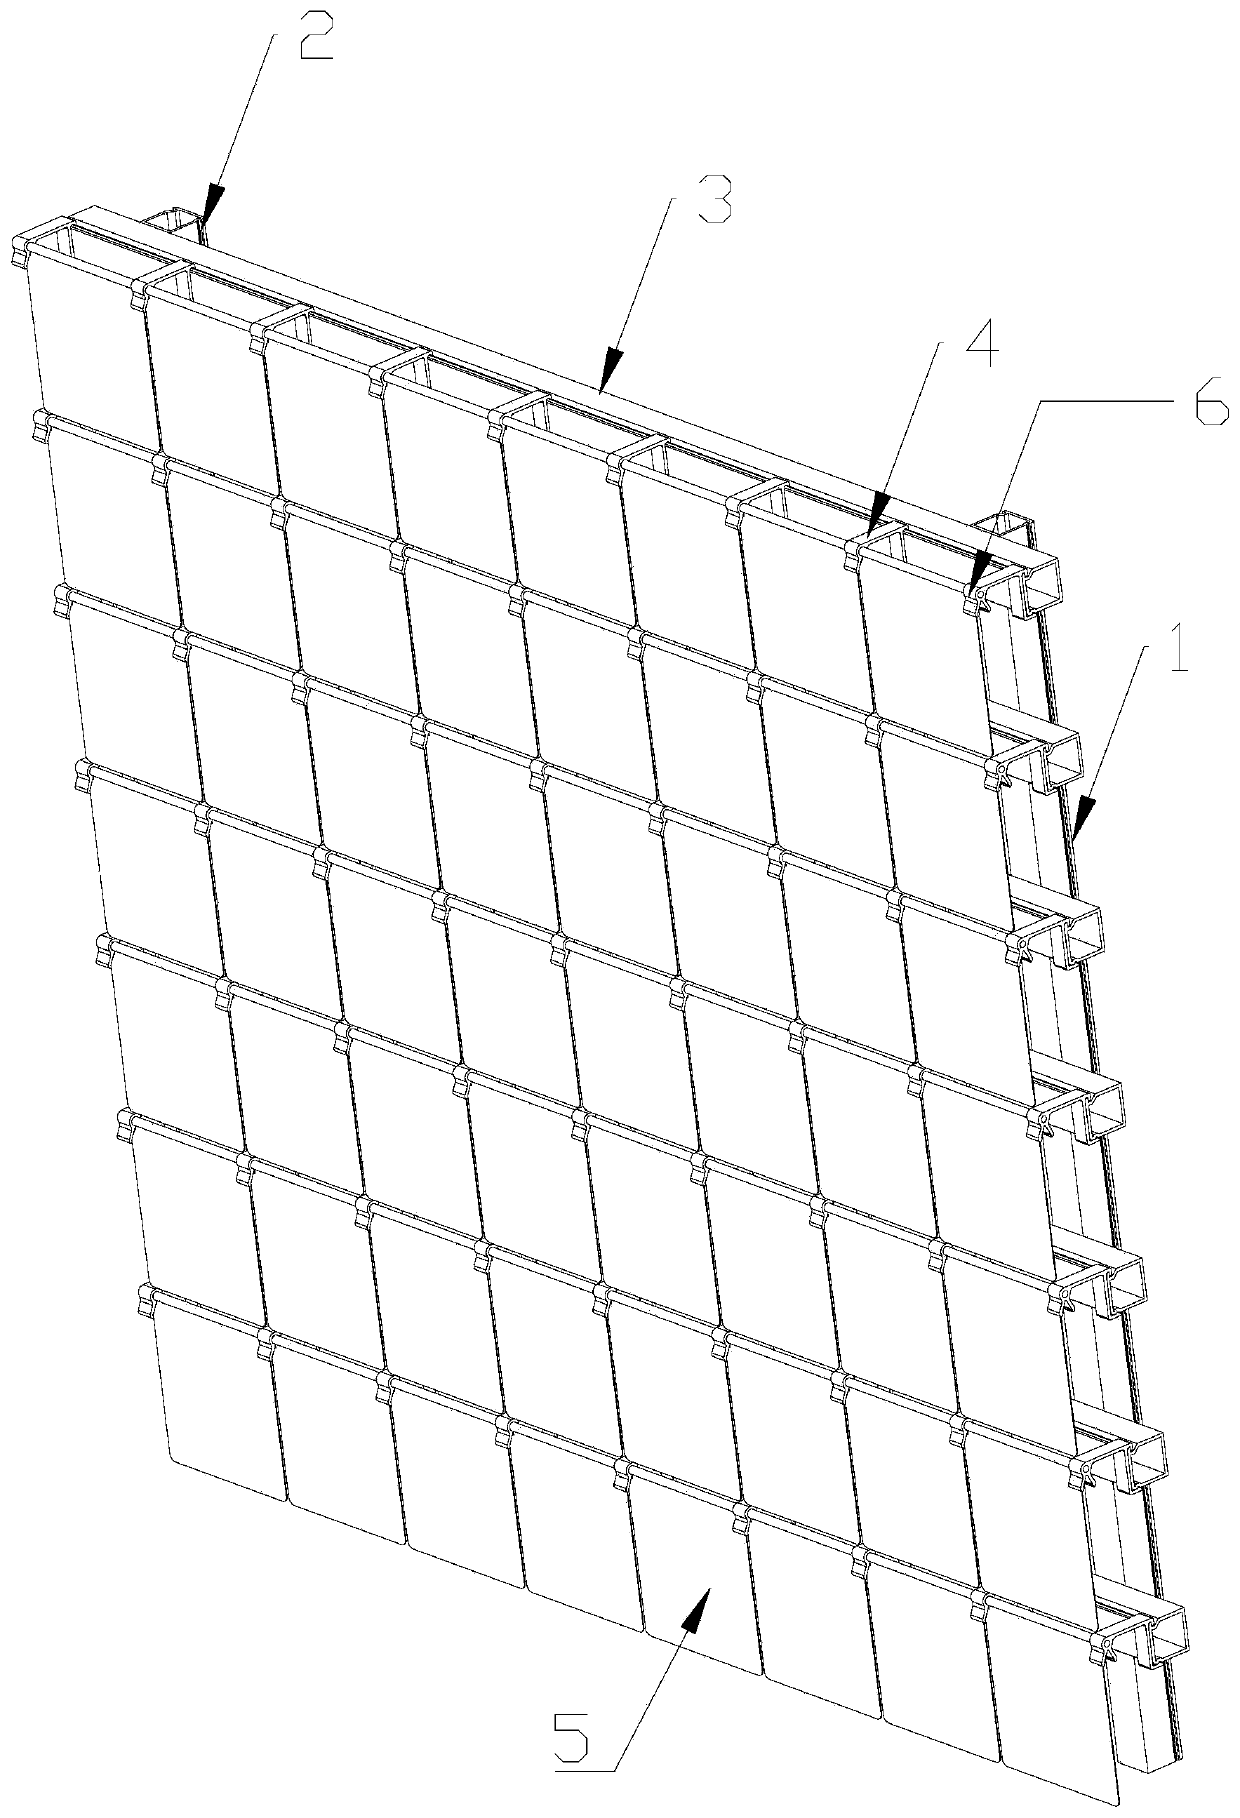 Wind-driven curtain wall structure with swing shafts